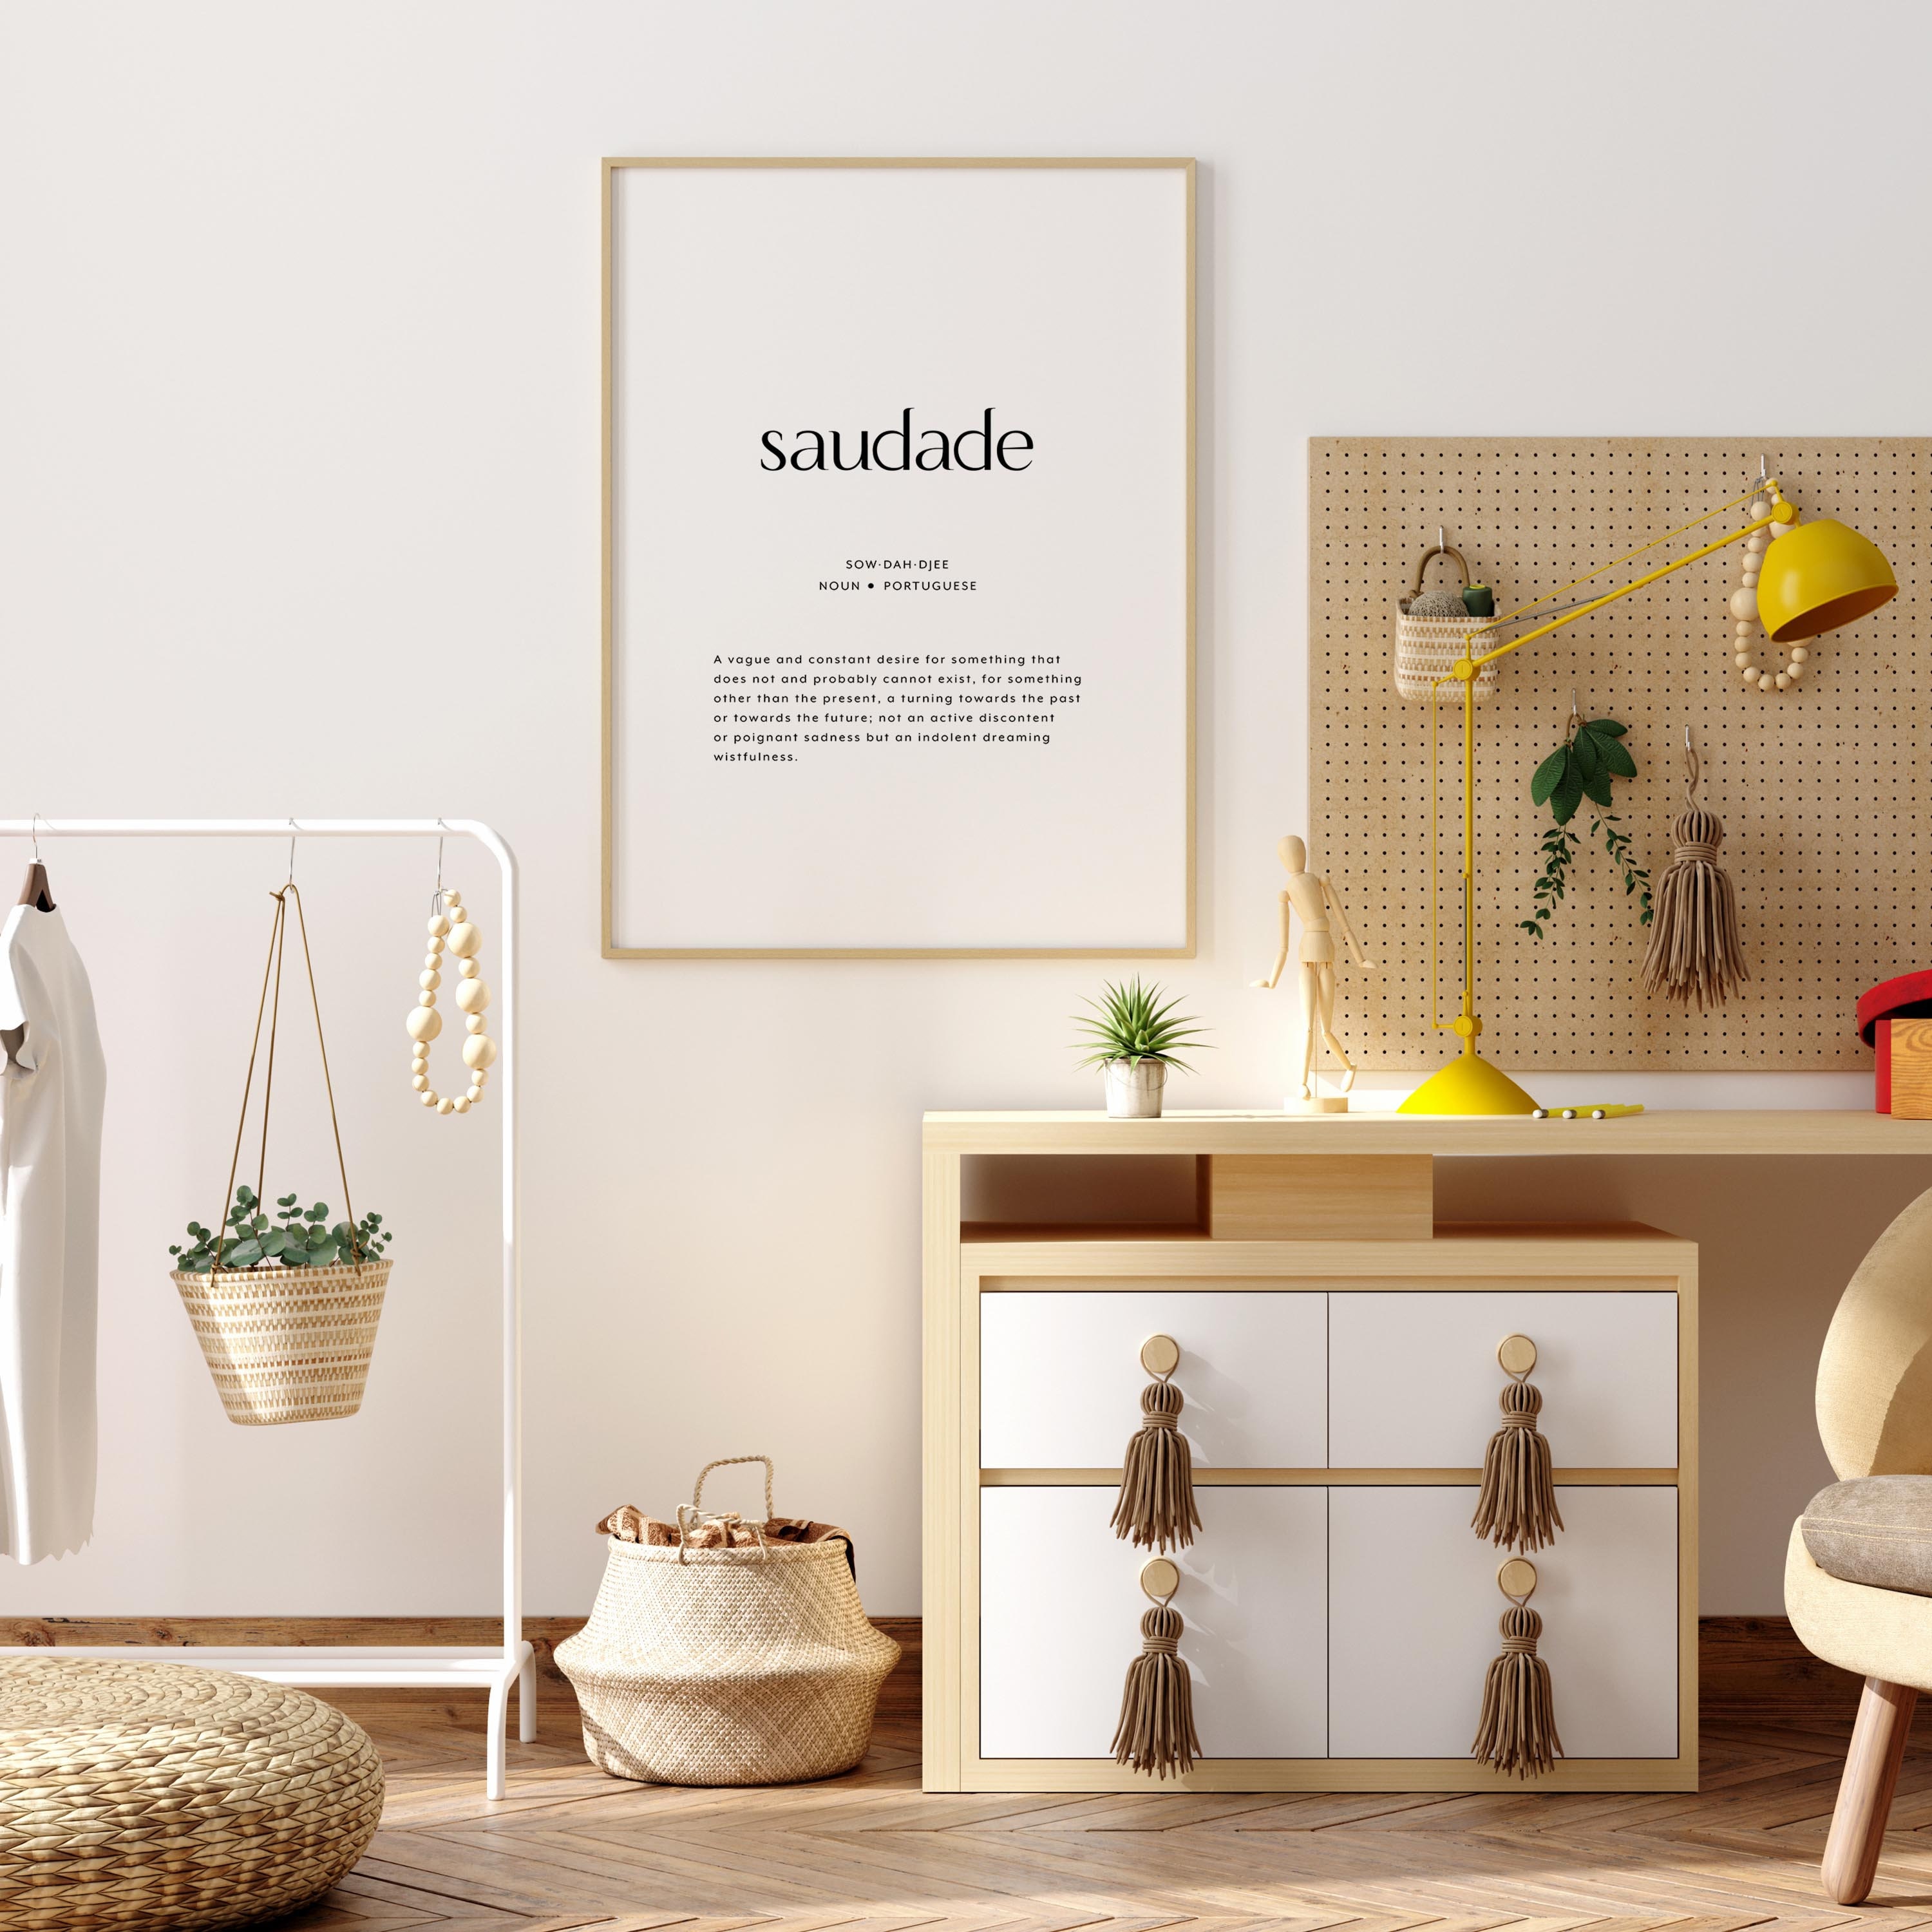 Saudade Definition Wall Art Printable Wall Decor (Instant Download) 